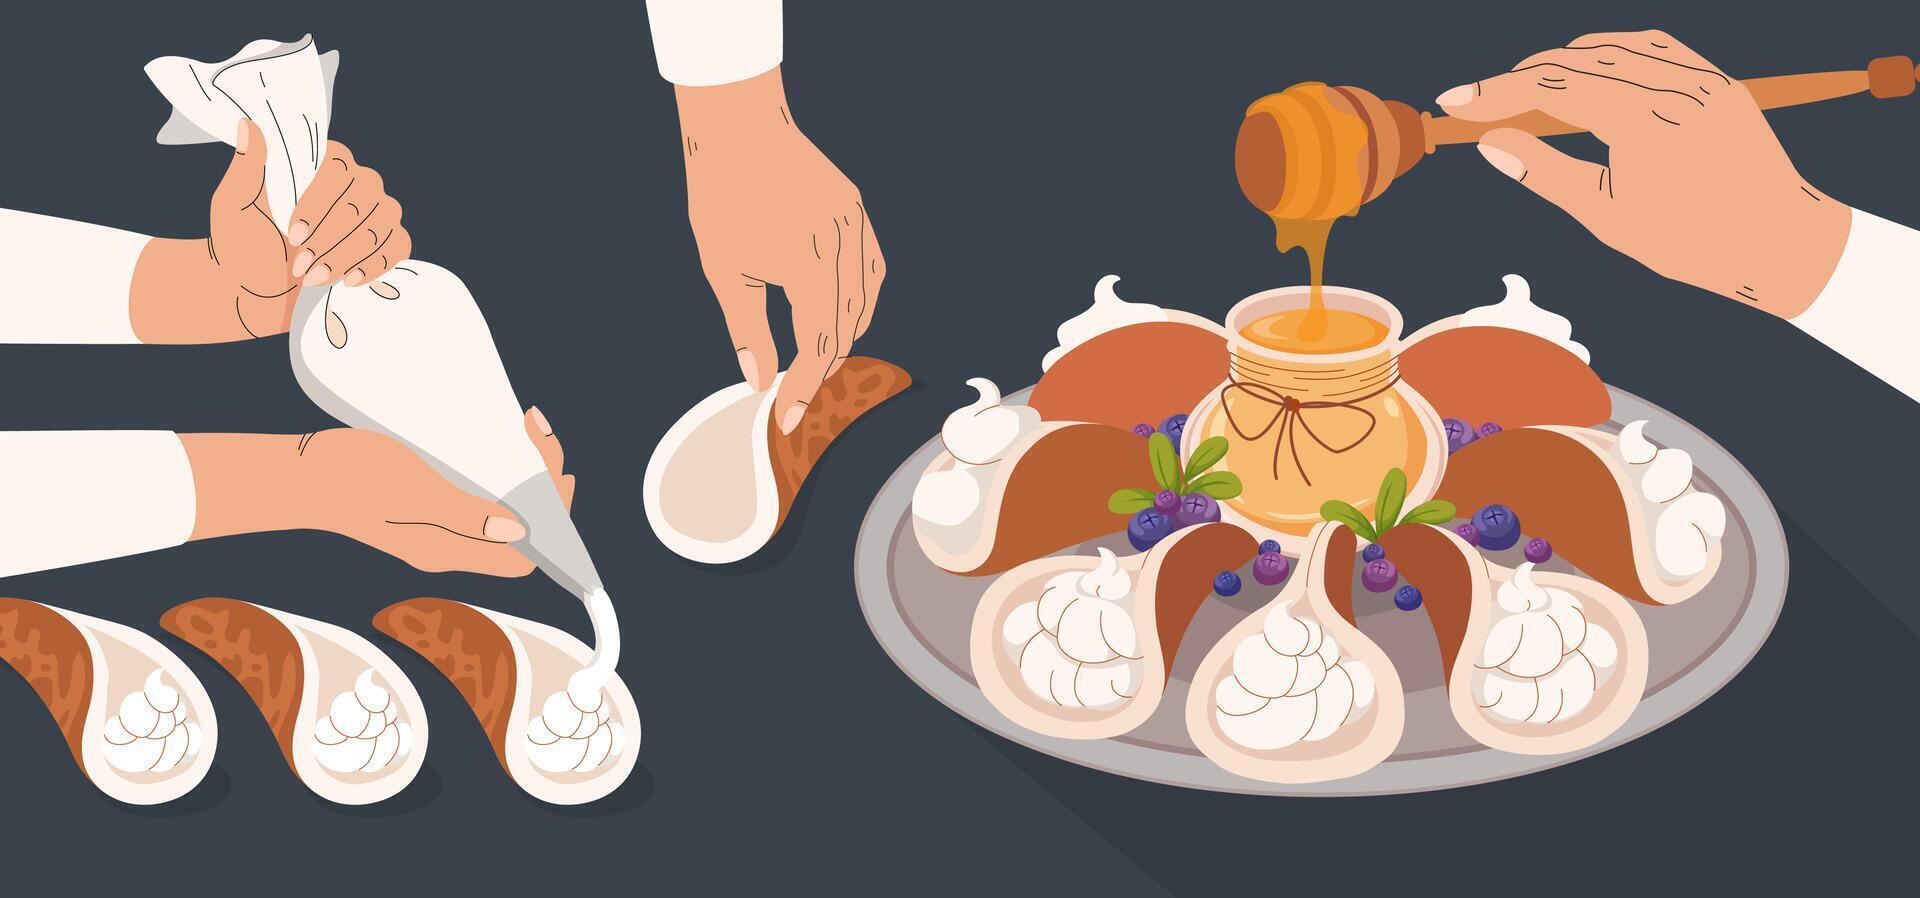 Cooking Process sweet pastries. Arabic pancakes with cream filling. Pastry Bag icing. Human hands. Honey in glass jar. Muslim desert for holiday of Eid al Fitr. Vector flat illustration.